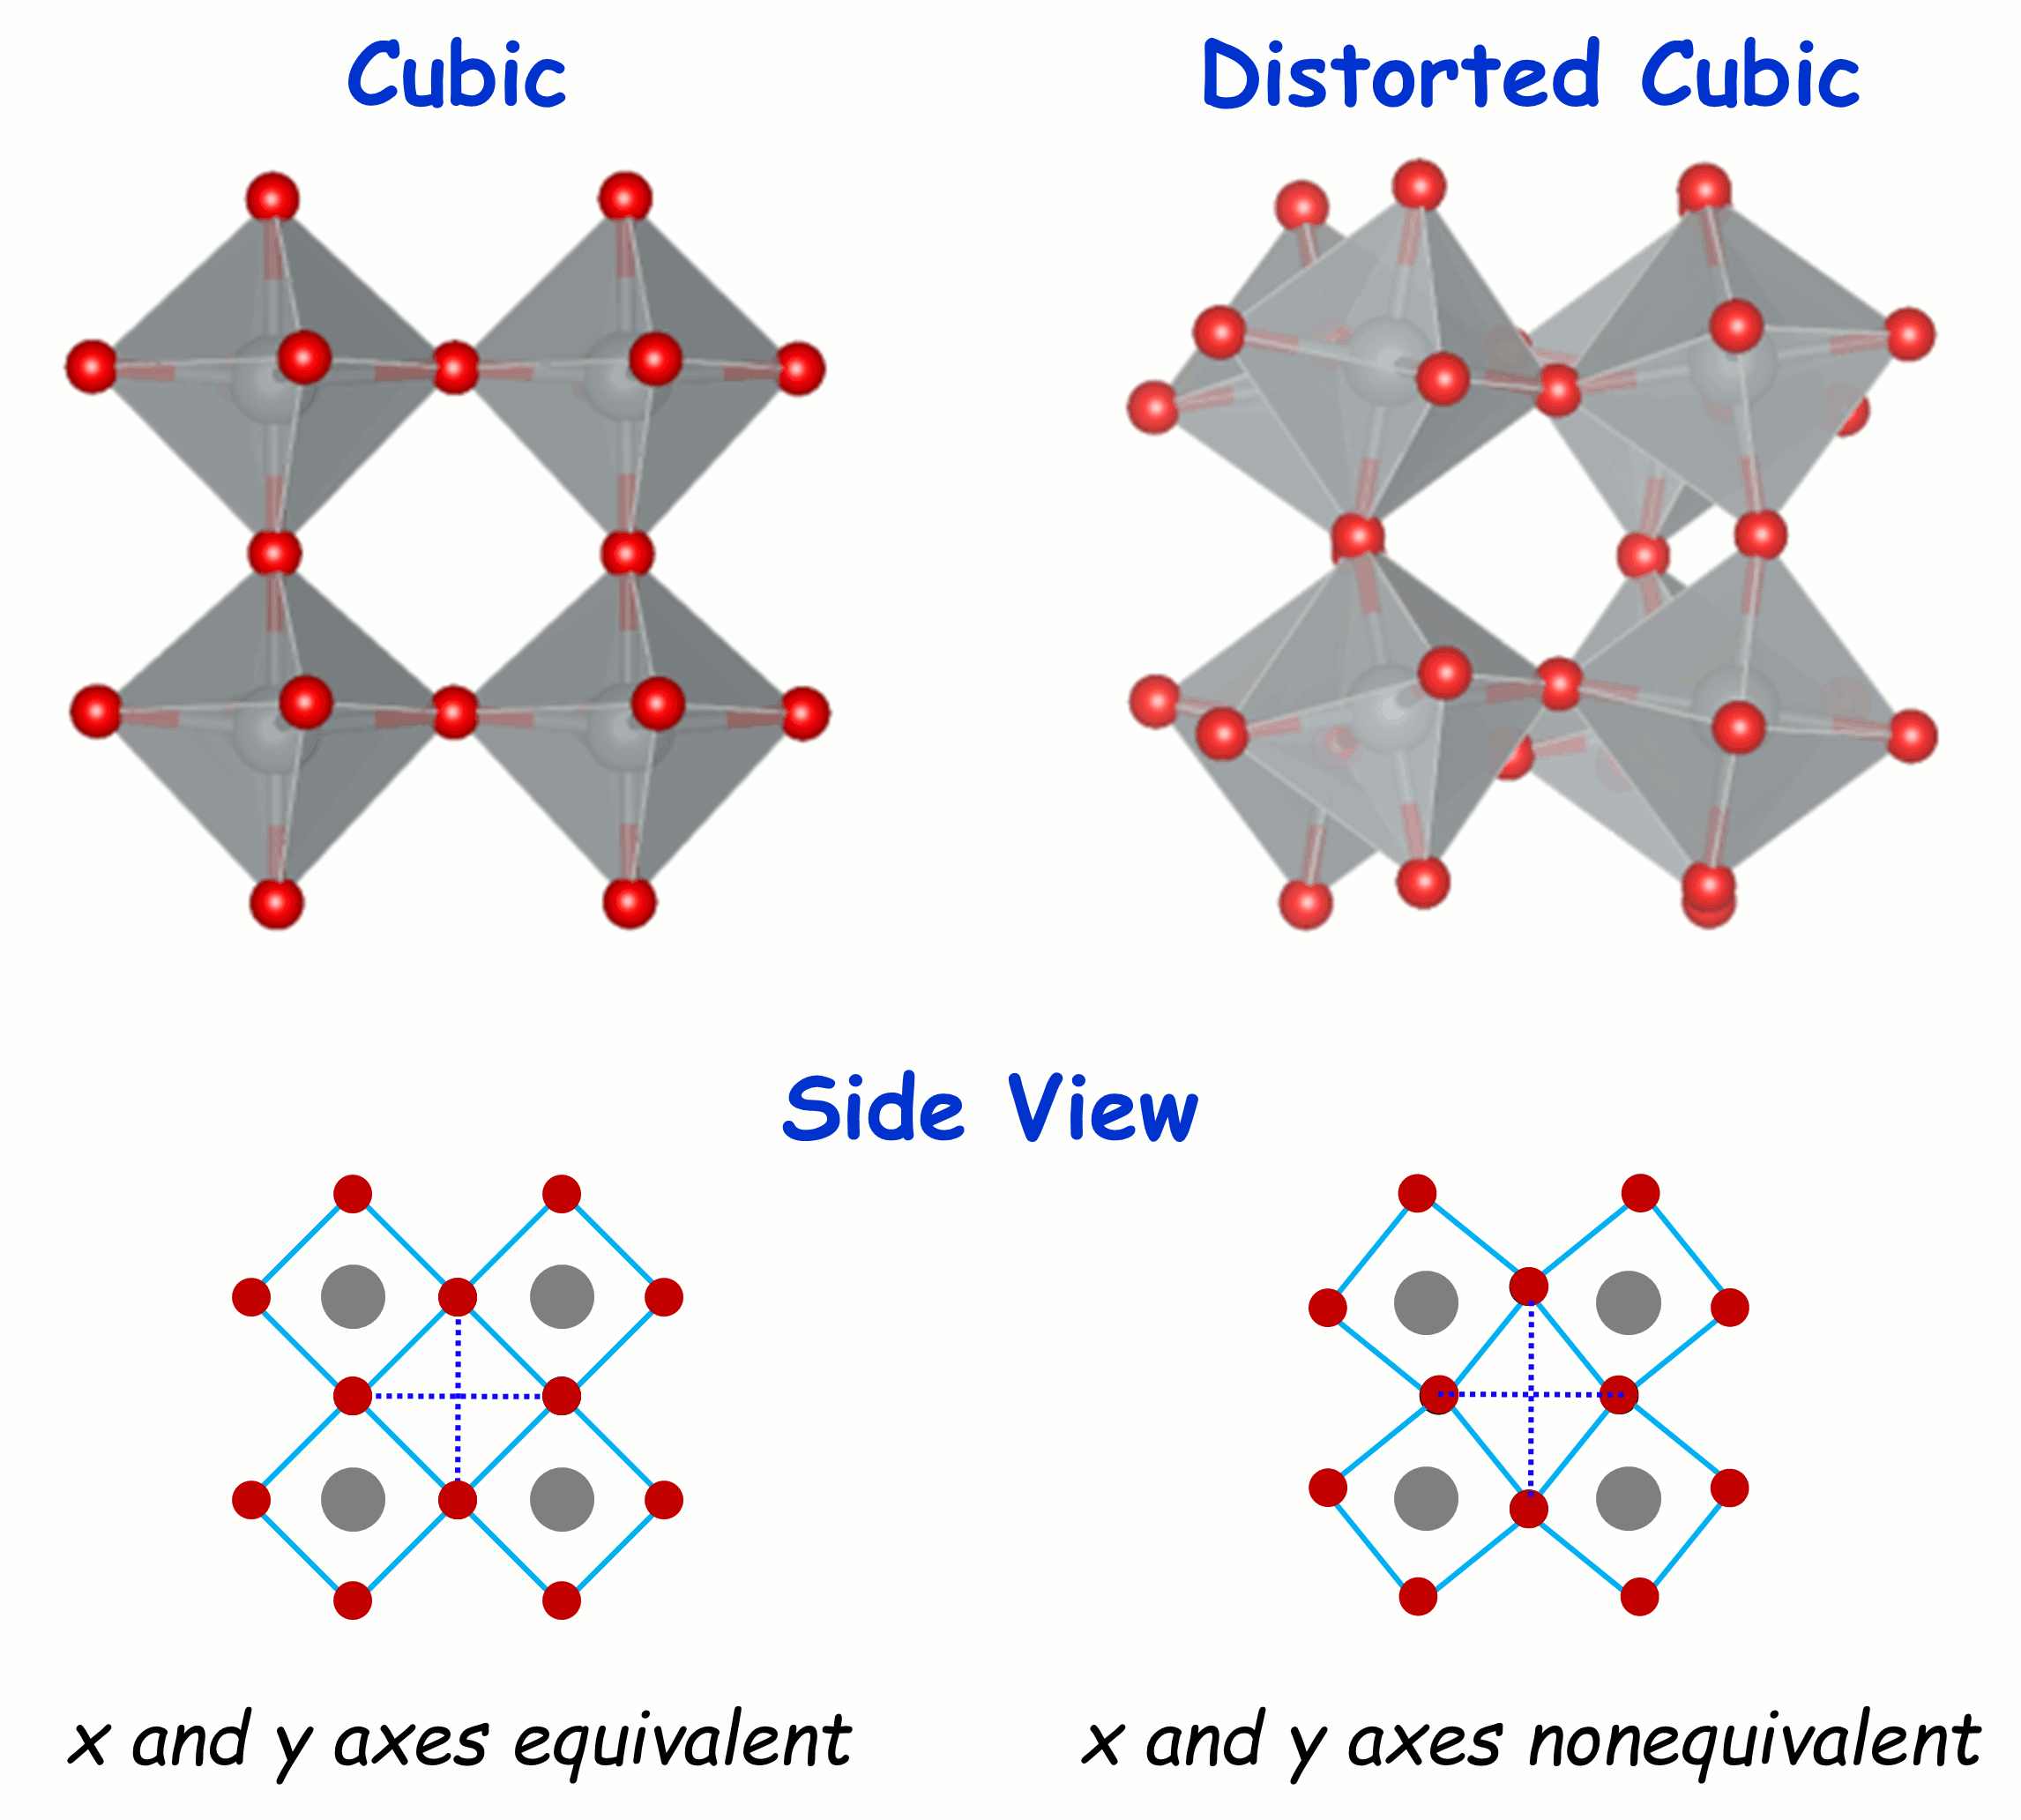 Cubic (left) and distorted cubic (right) crystal structures.